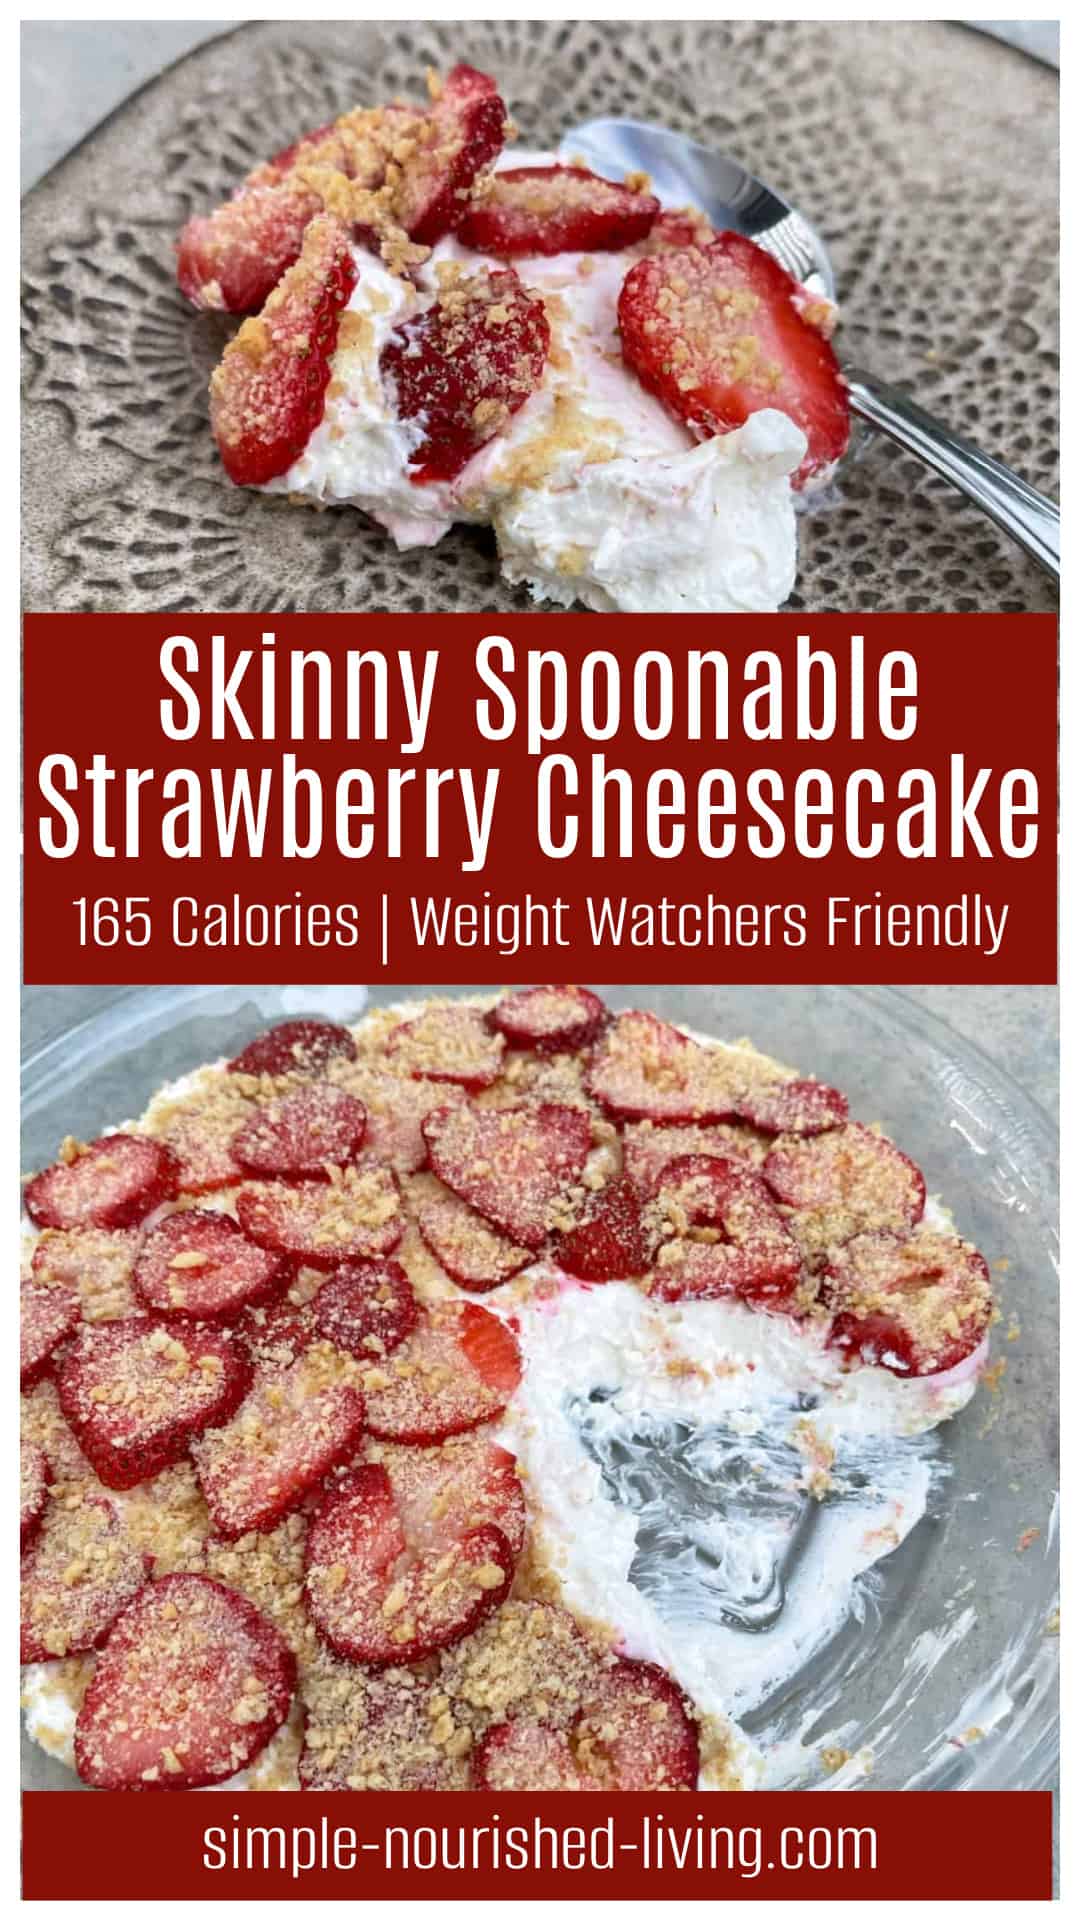 spoonable strawberry cheesecake in a pie plate and a serving on a pretty decorative textured pottery plate with spoon alongside.